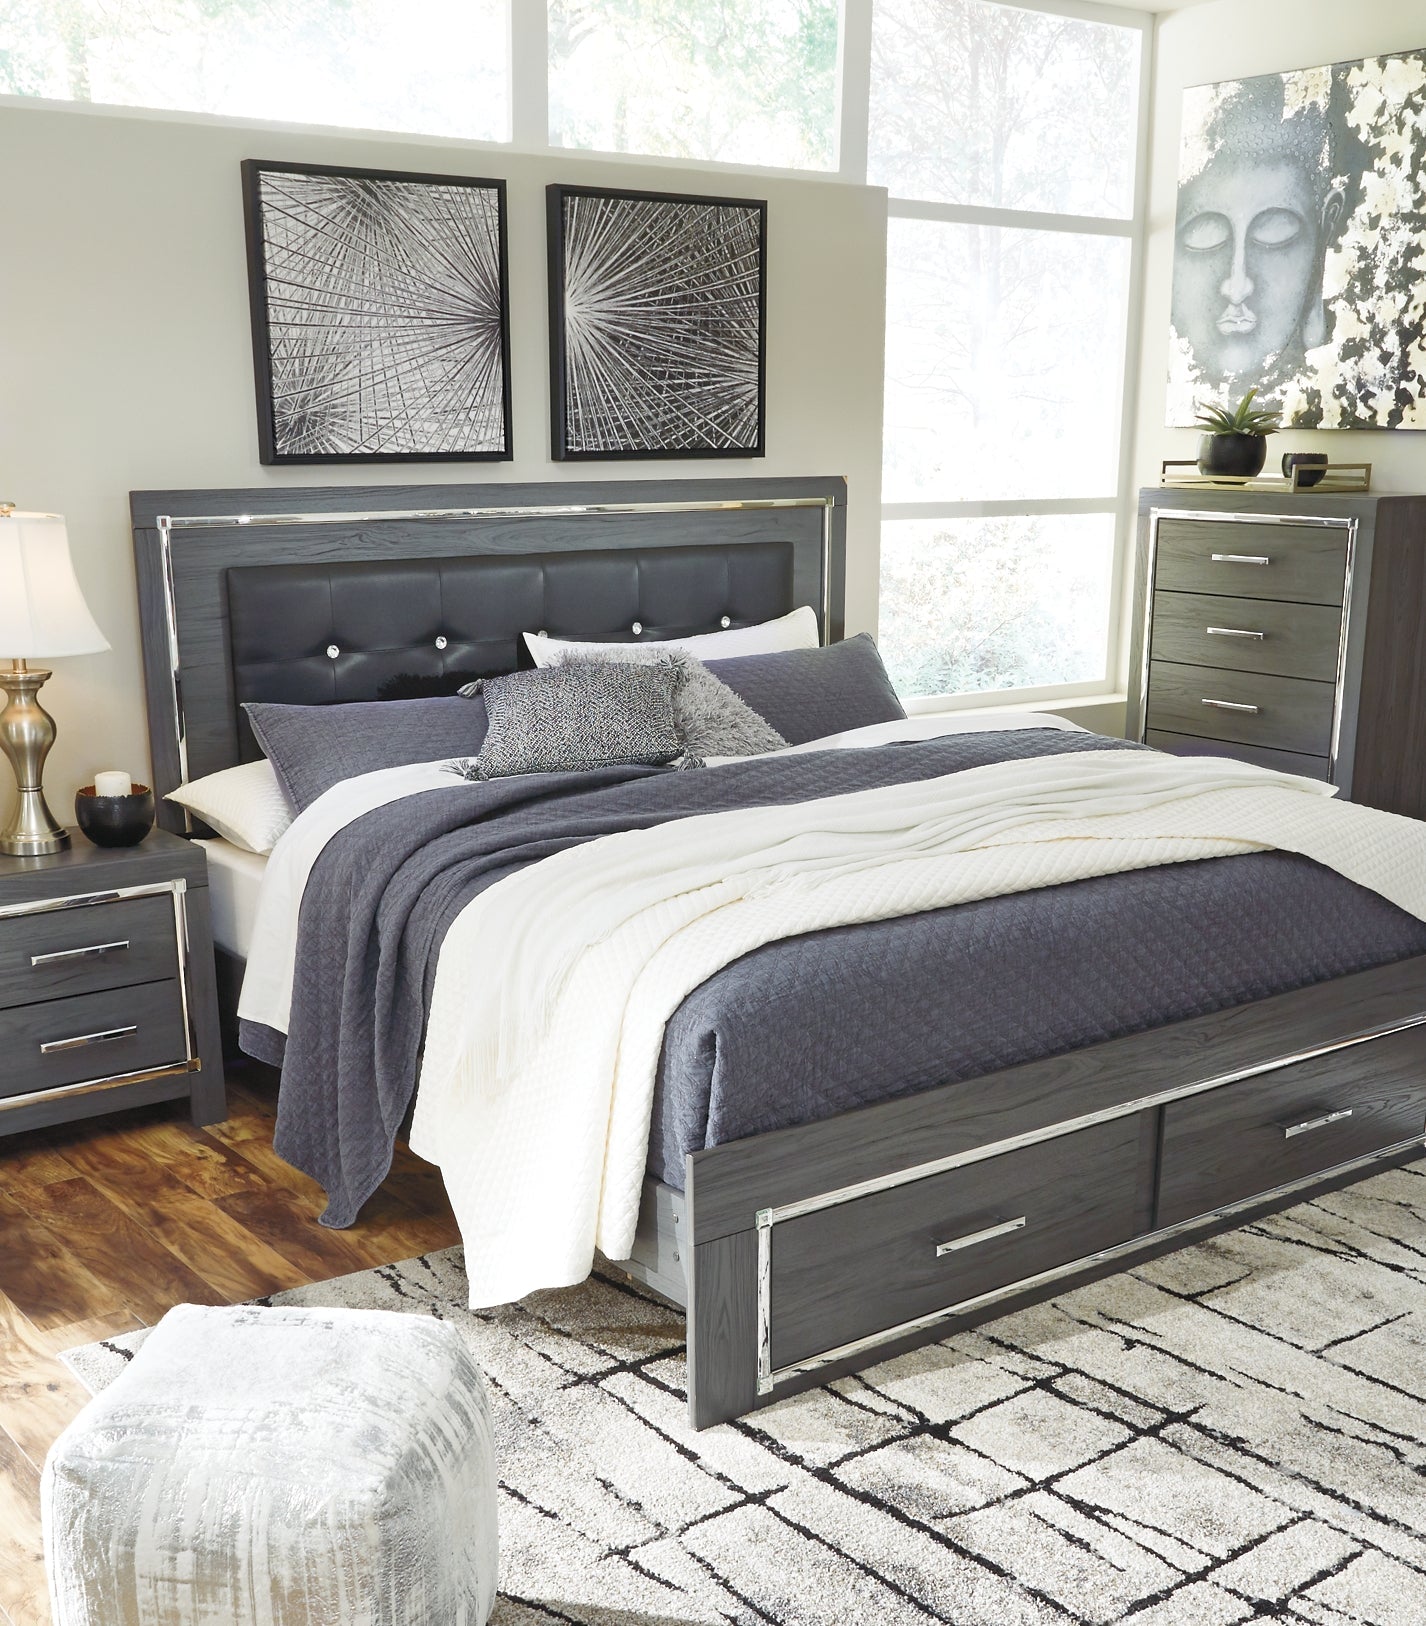 Lodanna Queen Panel Bed with 2 Storage Drawers at Cloud 9 Mattress & Furniture furniture, home furnishing, home decor